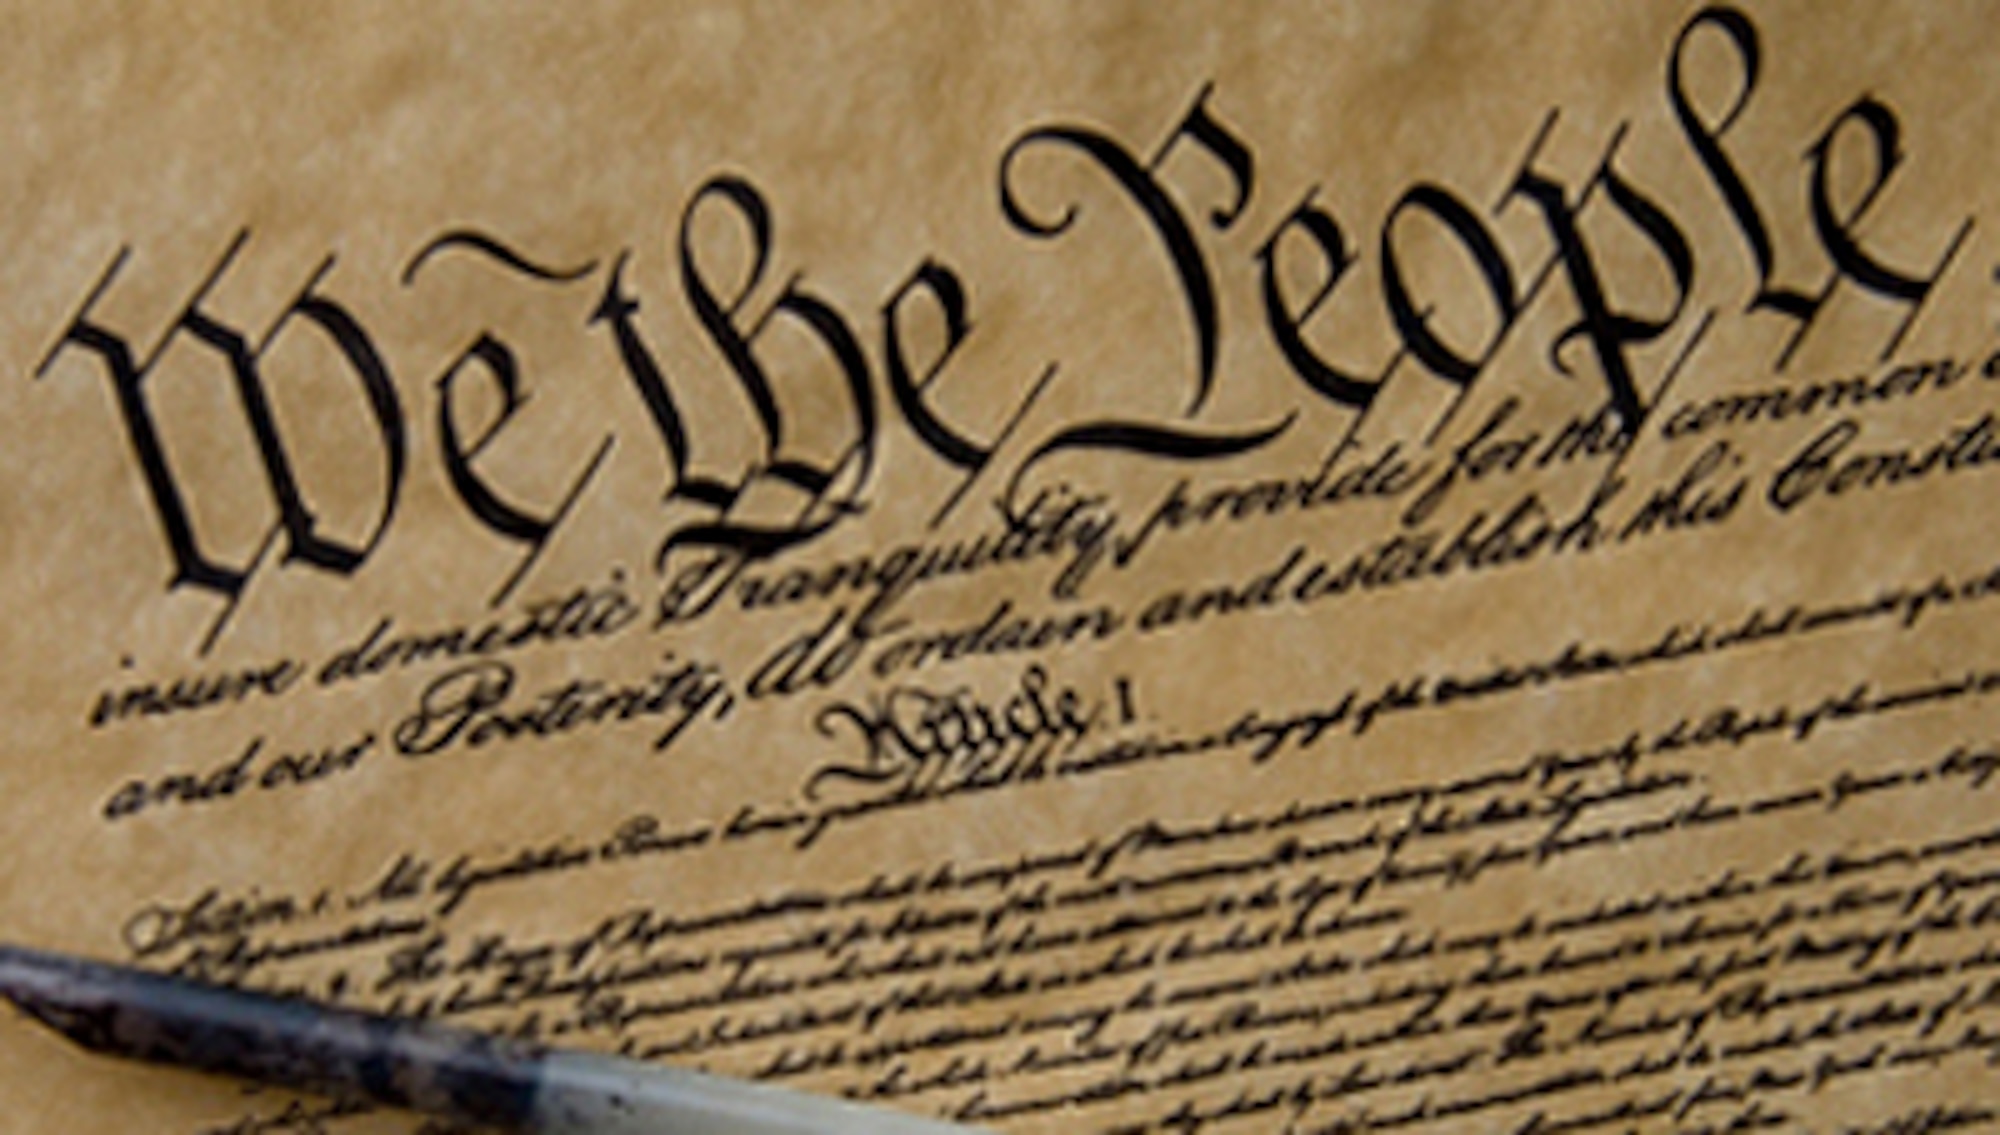 The Department of Defense observes Constitution Day and Citizenship Day Sept. 17 to commemorate the signing of the U.S. Constitution in Philadelphia on that day in 1787. (U.S. Air Force illustration/James Borland)